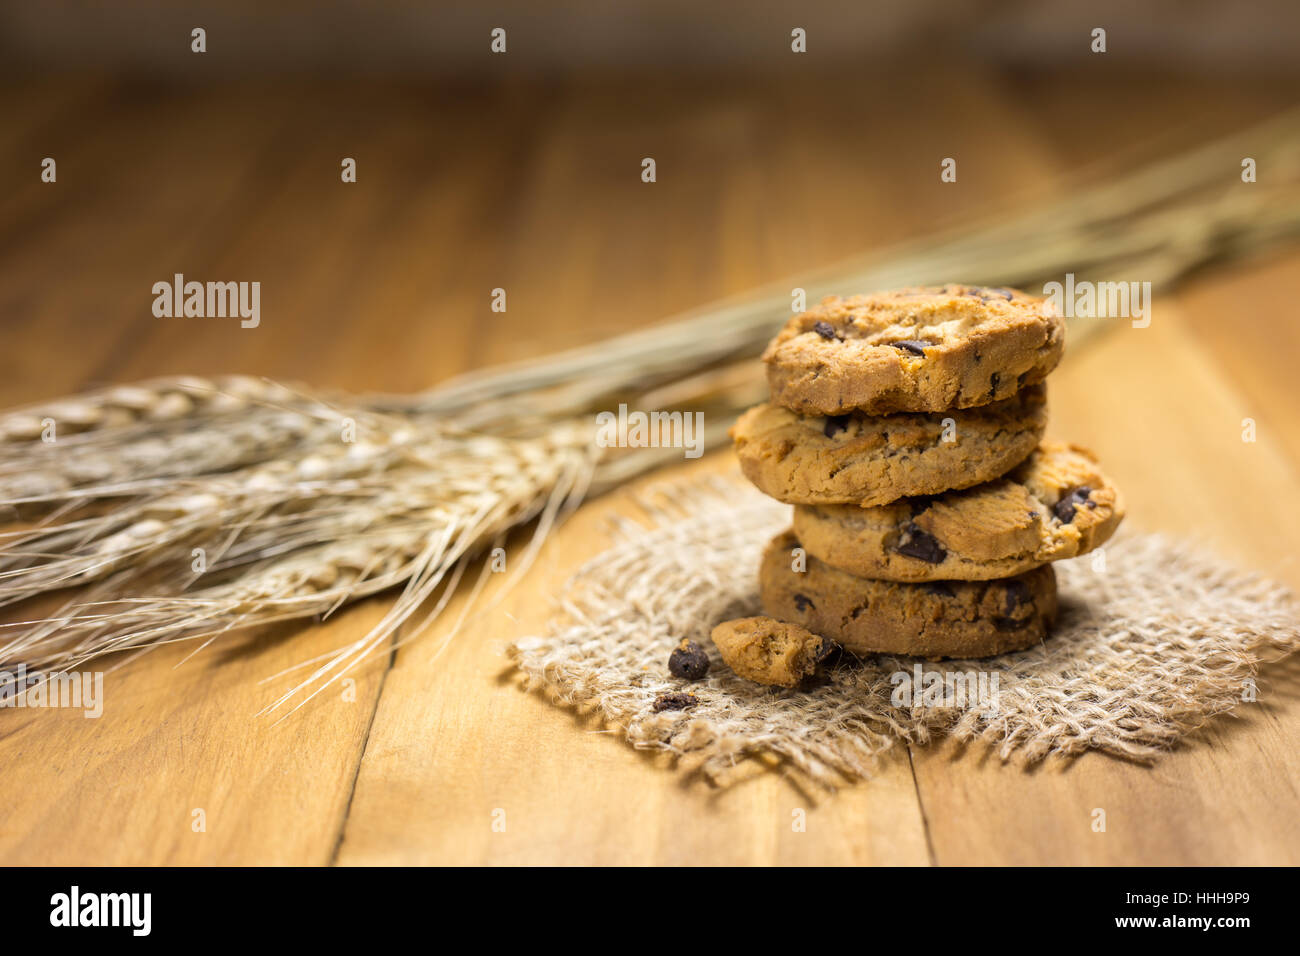 Chocolate cookies on a cloth sack on wood. Chocolate chip cookies and rice malt shot on a brown cloth . Stock Photo